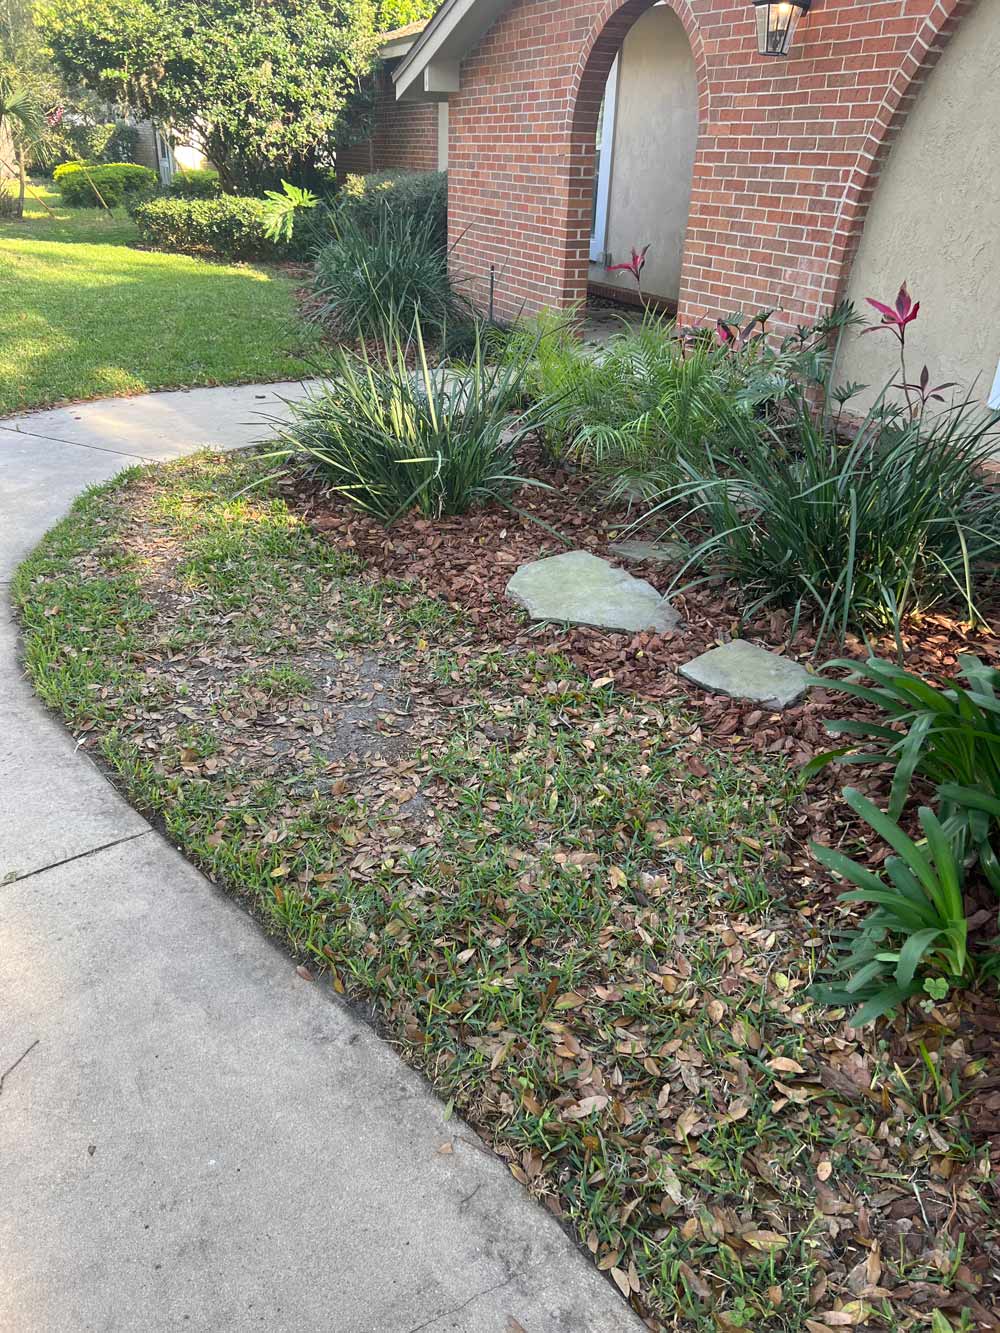 Front yard with pavement walkway, grass with brown leaves on it.